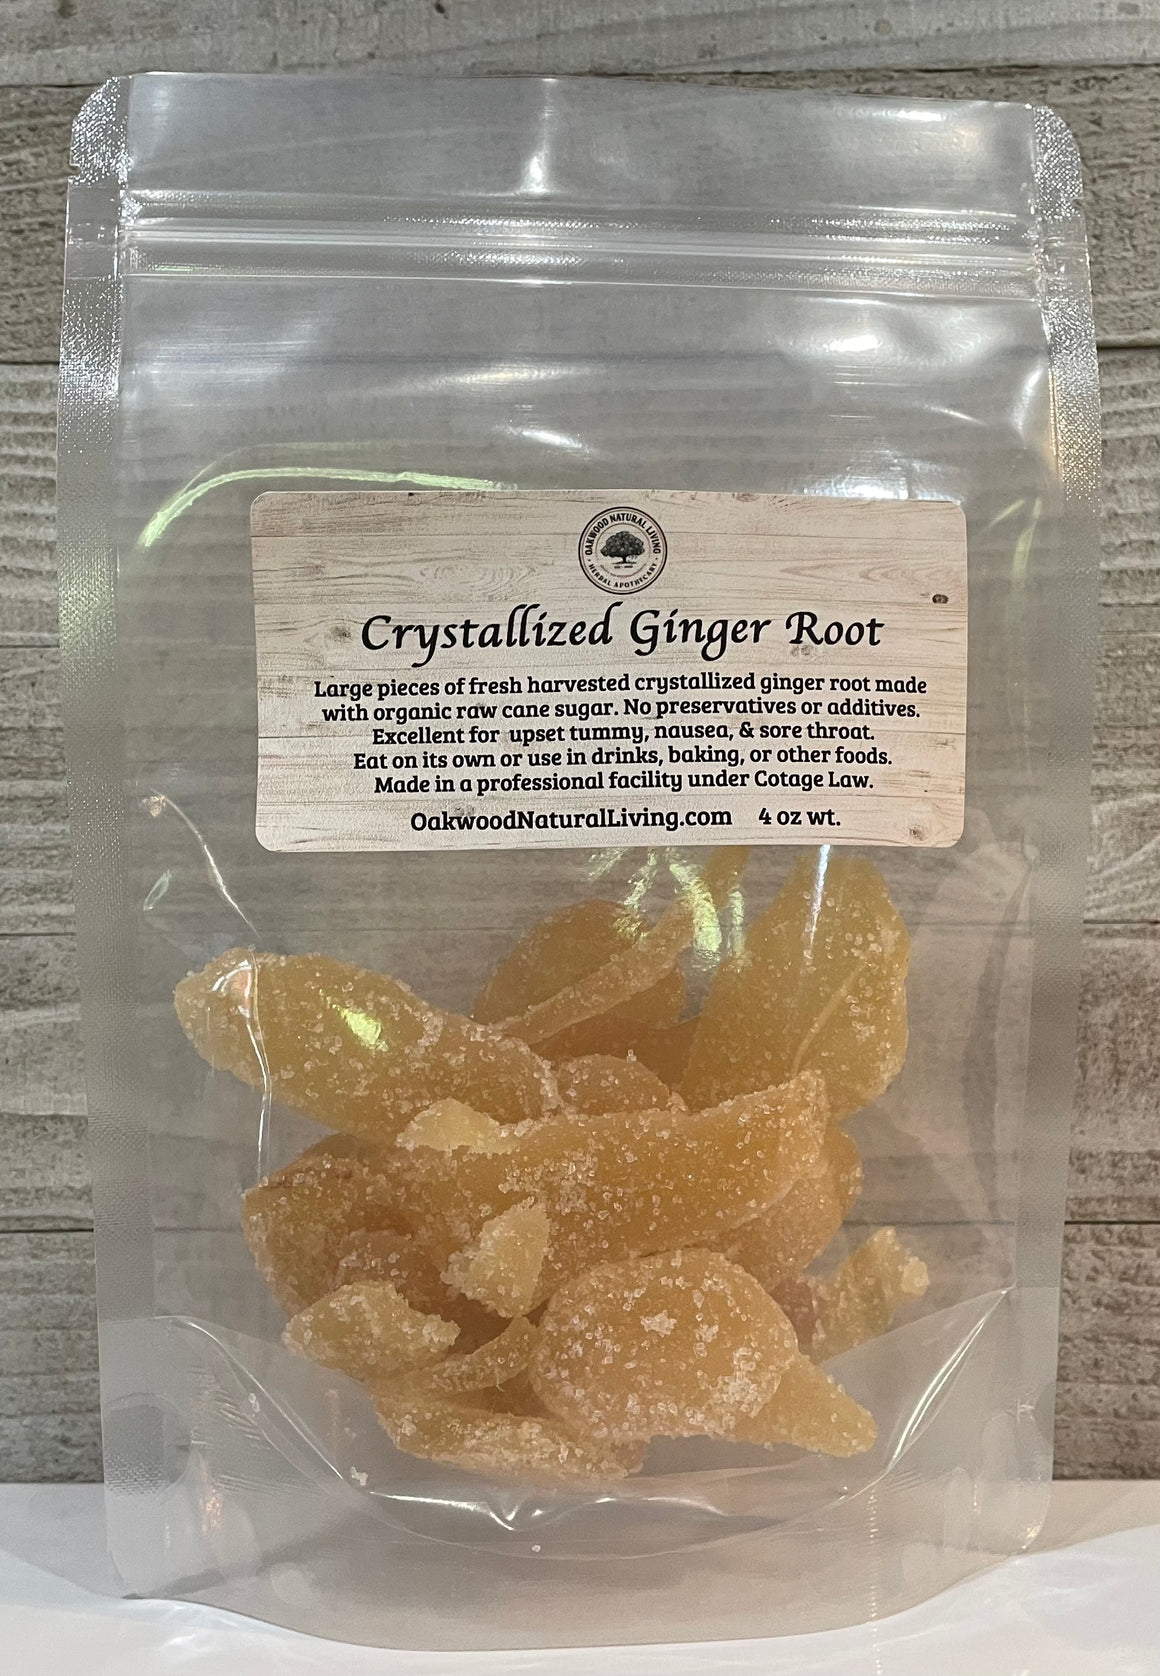 Crystalized Ginger Root